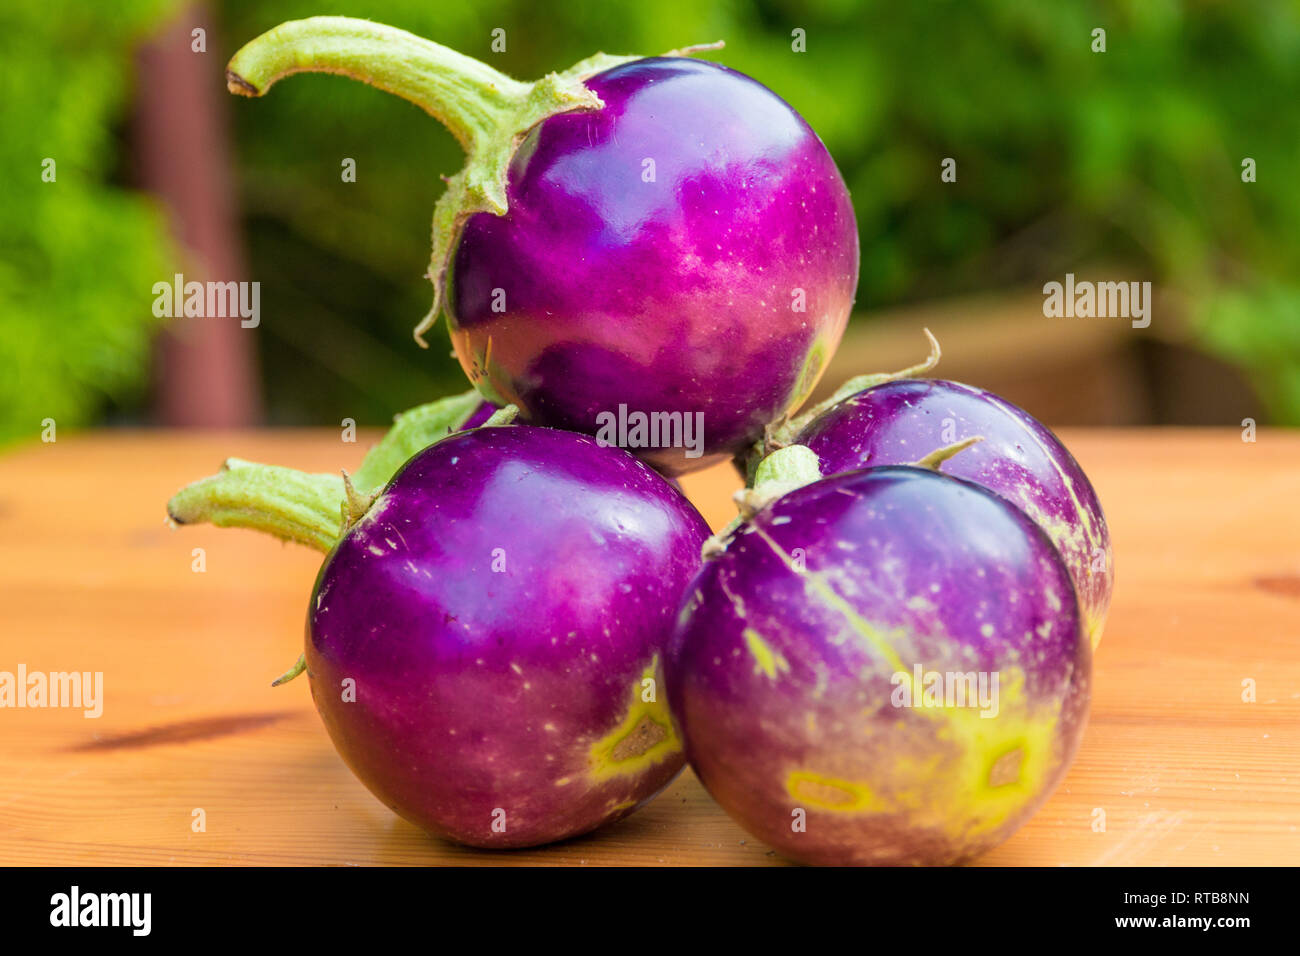 Great close-up view of a bunch of small round purple Thai eggplants (Solanum melongena) with their green stems, stacked on top of each other on a... Stock Photo